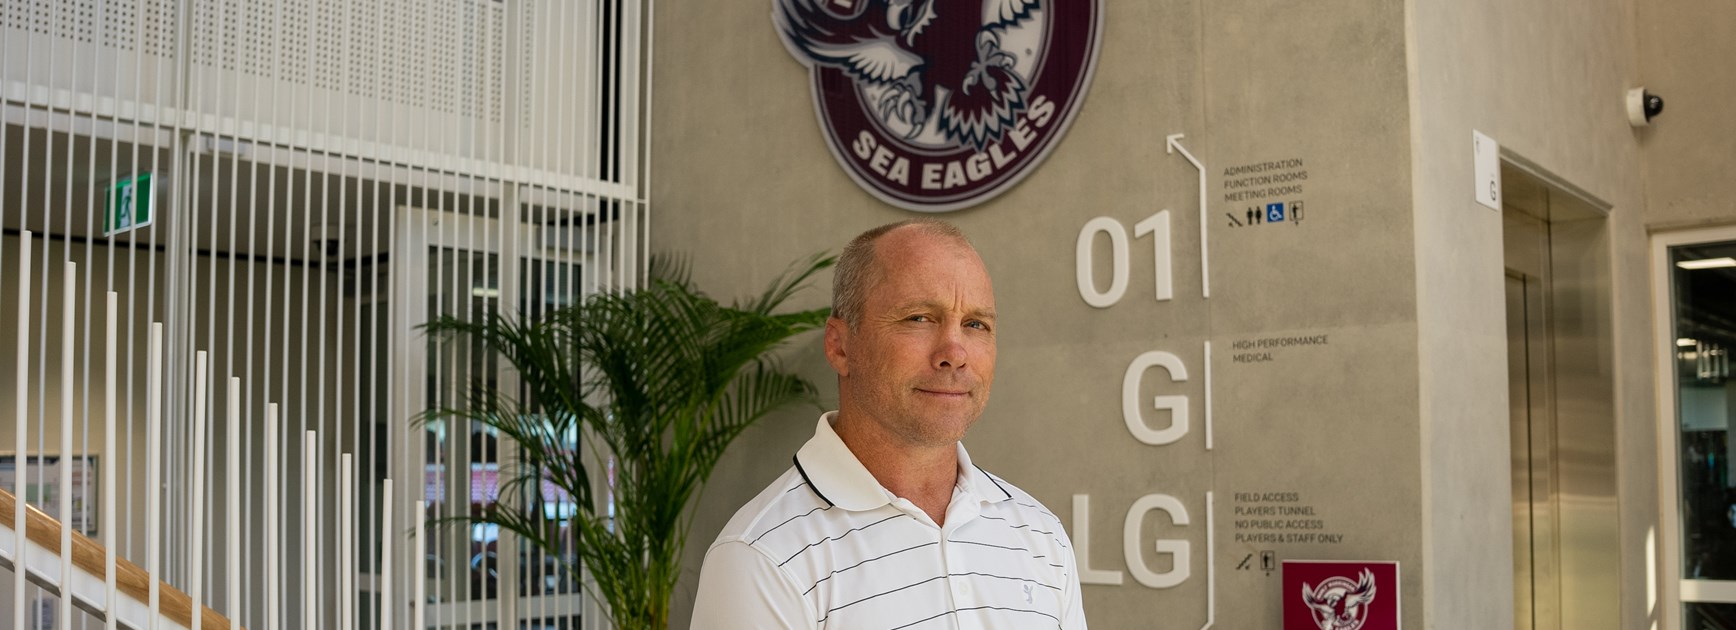 Geoff Toovey returns to the Sea Eagles